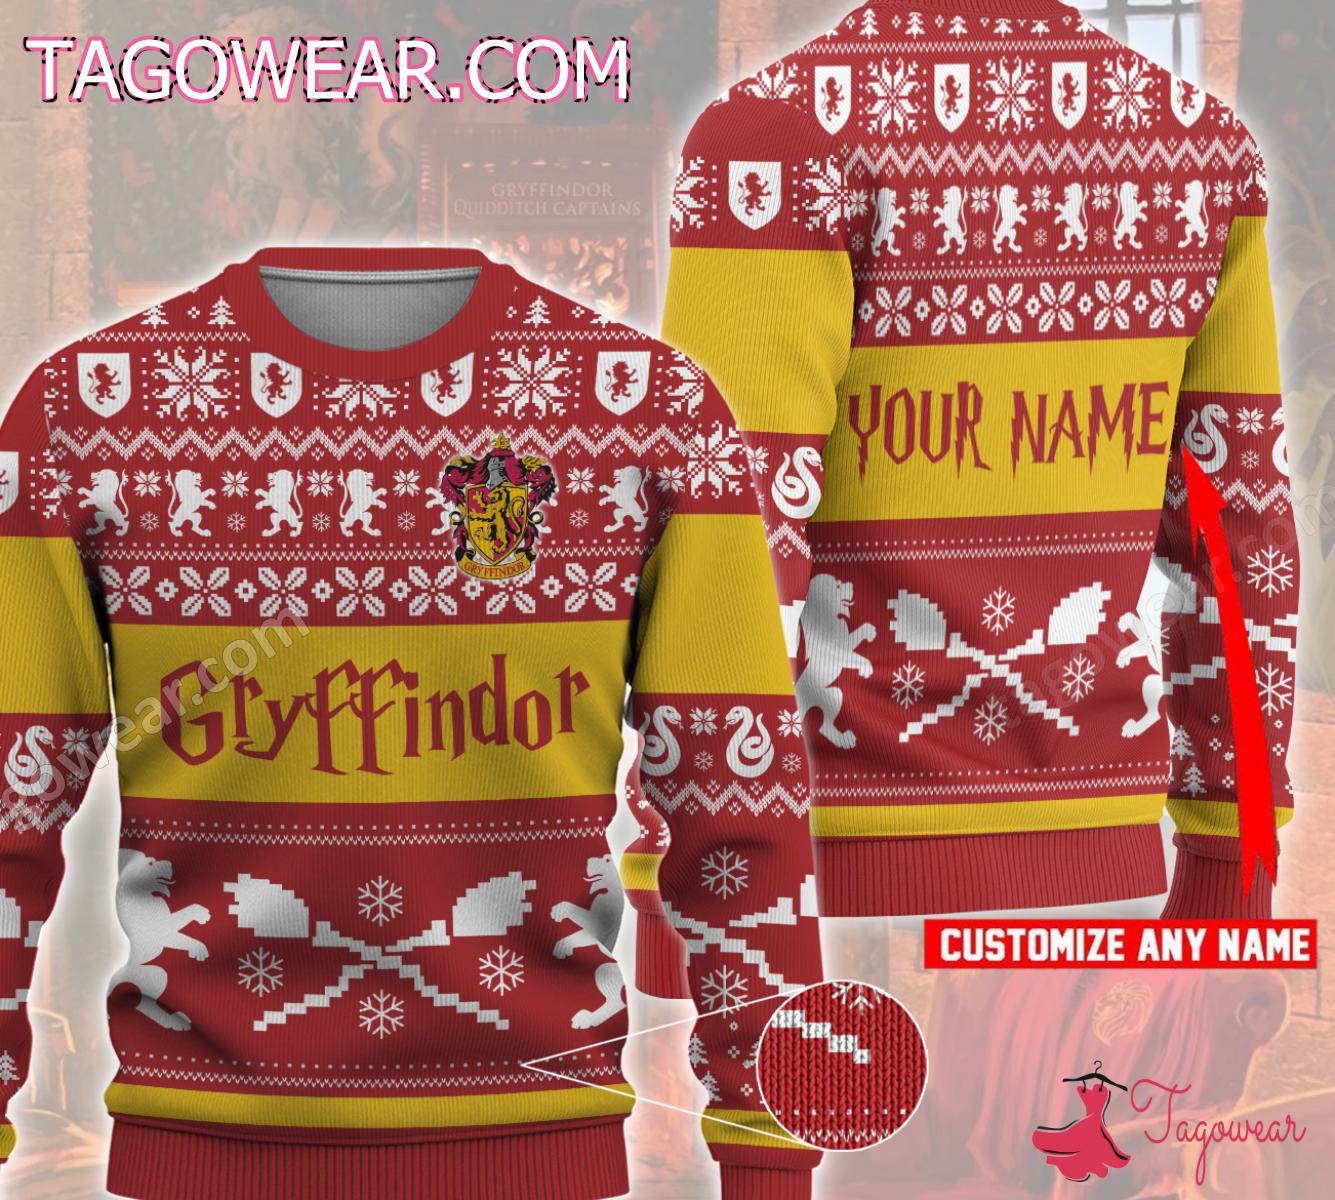 Gryffindor Harry Potter Personalized Ugly Christmas Sweater